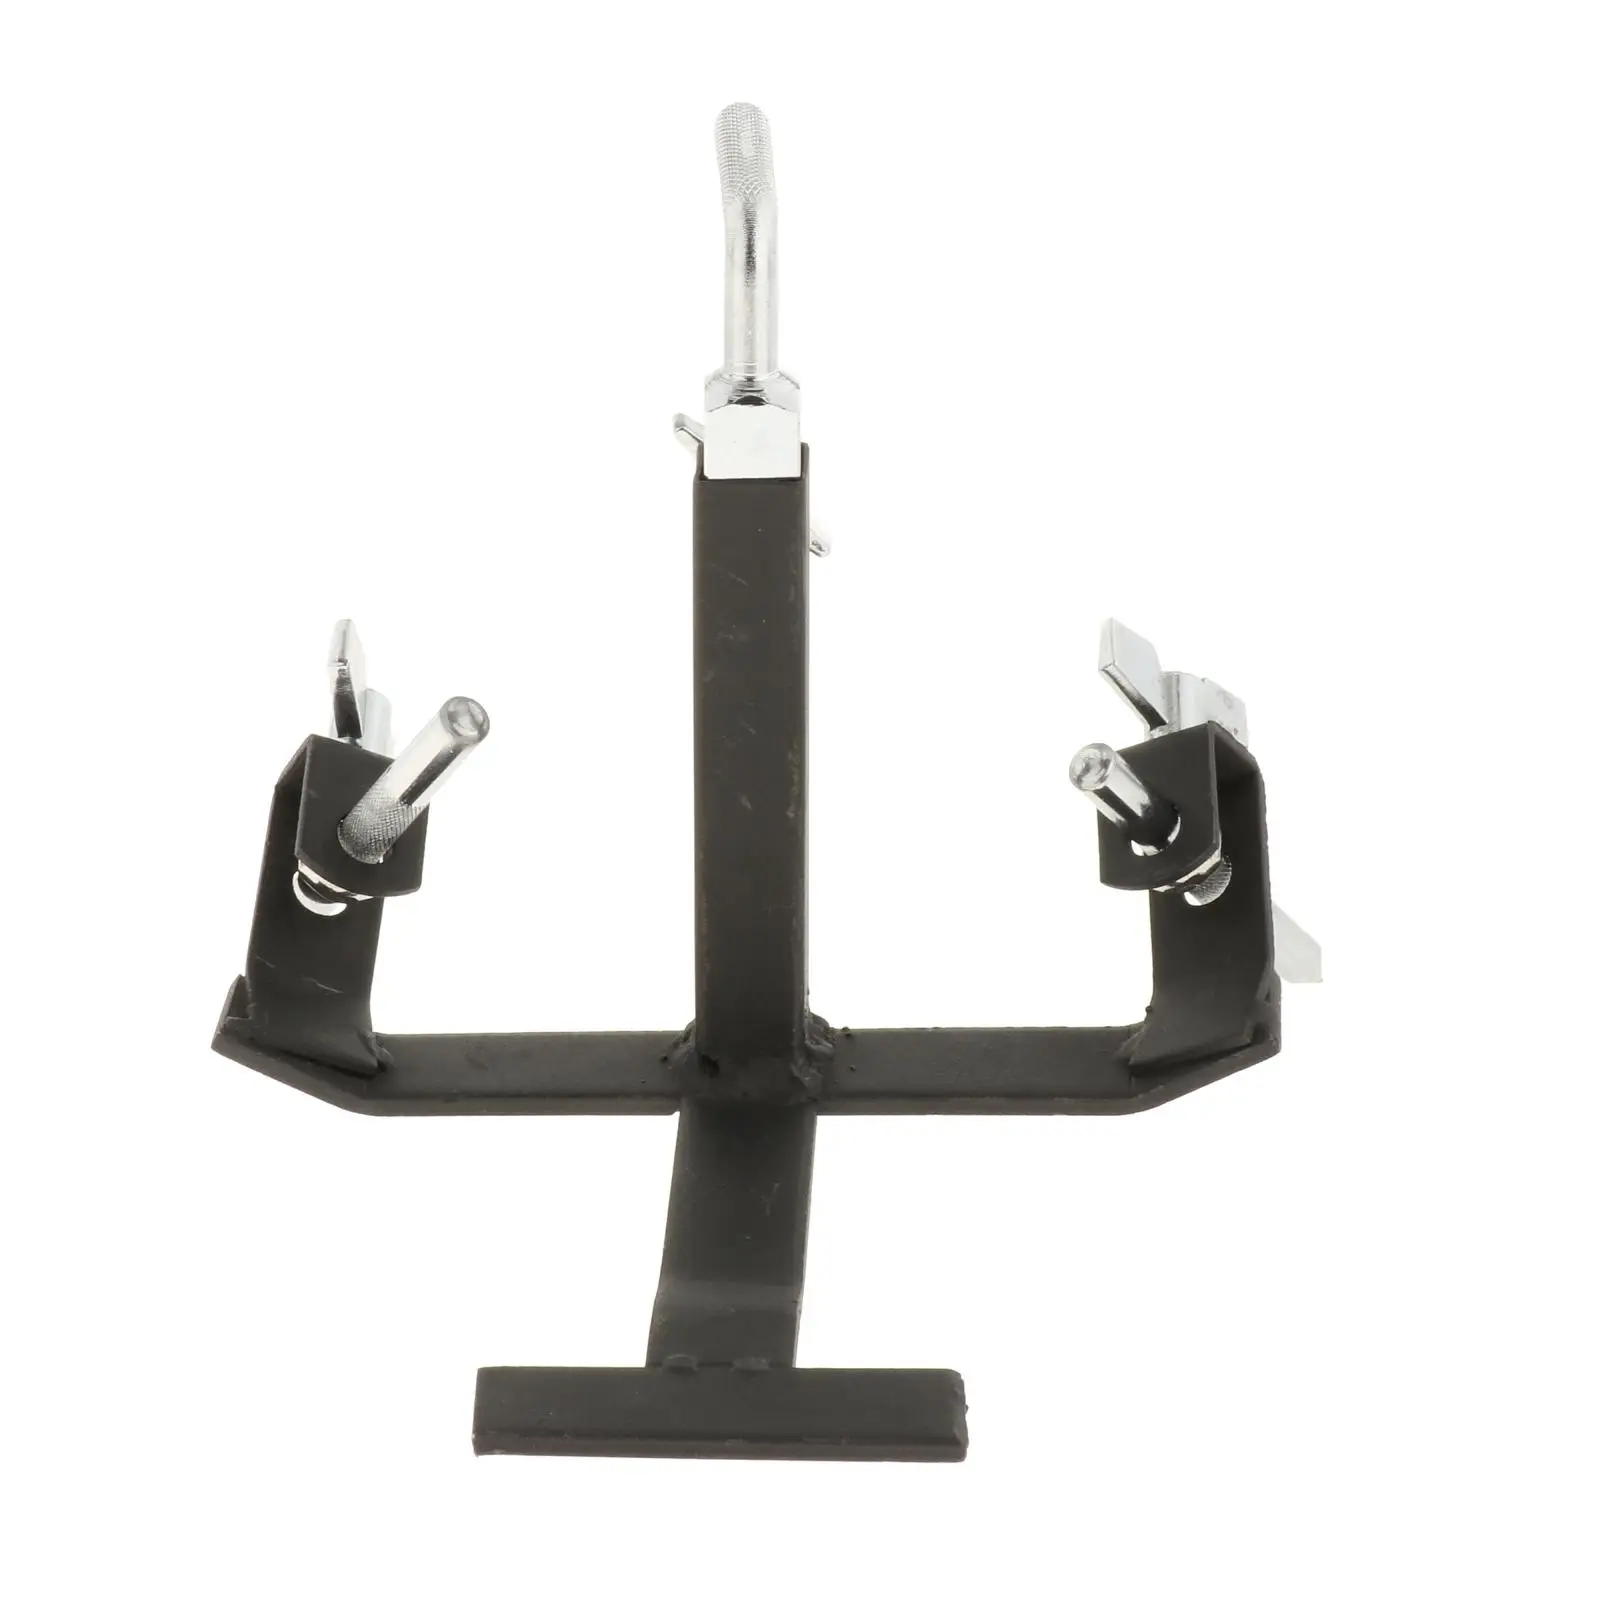 Mountable Percussion Cow Bell Accessories Drum Cymbal Stand Cowbell Pedal Foot Bracket for Drum Kit Practice Room